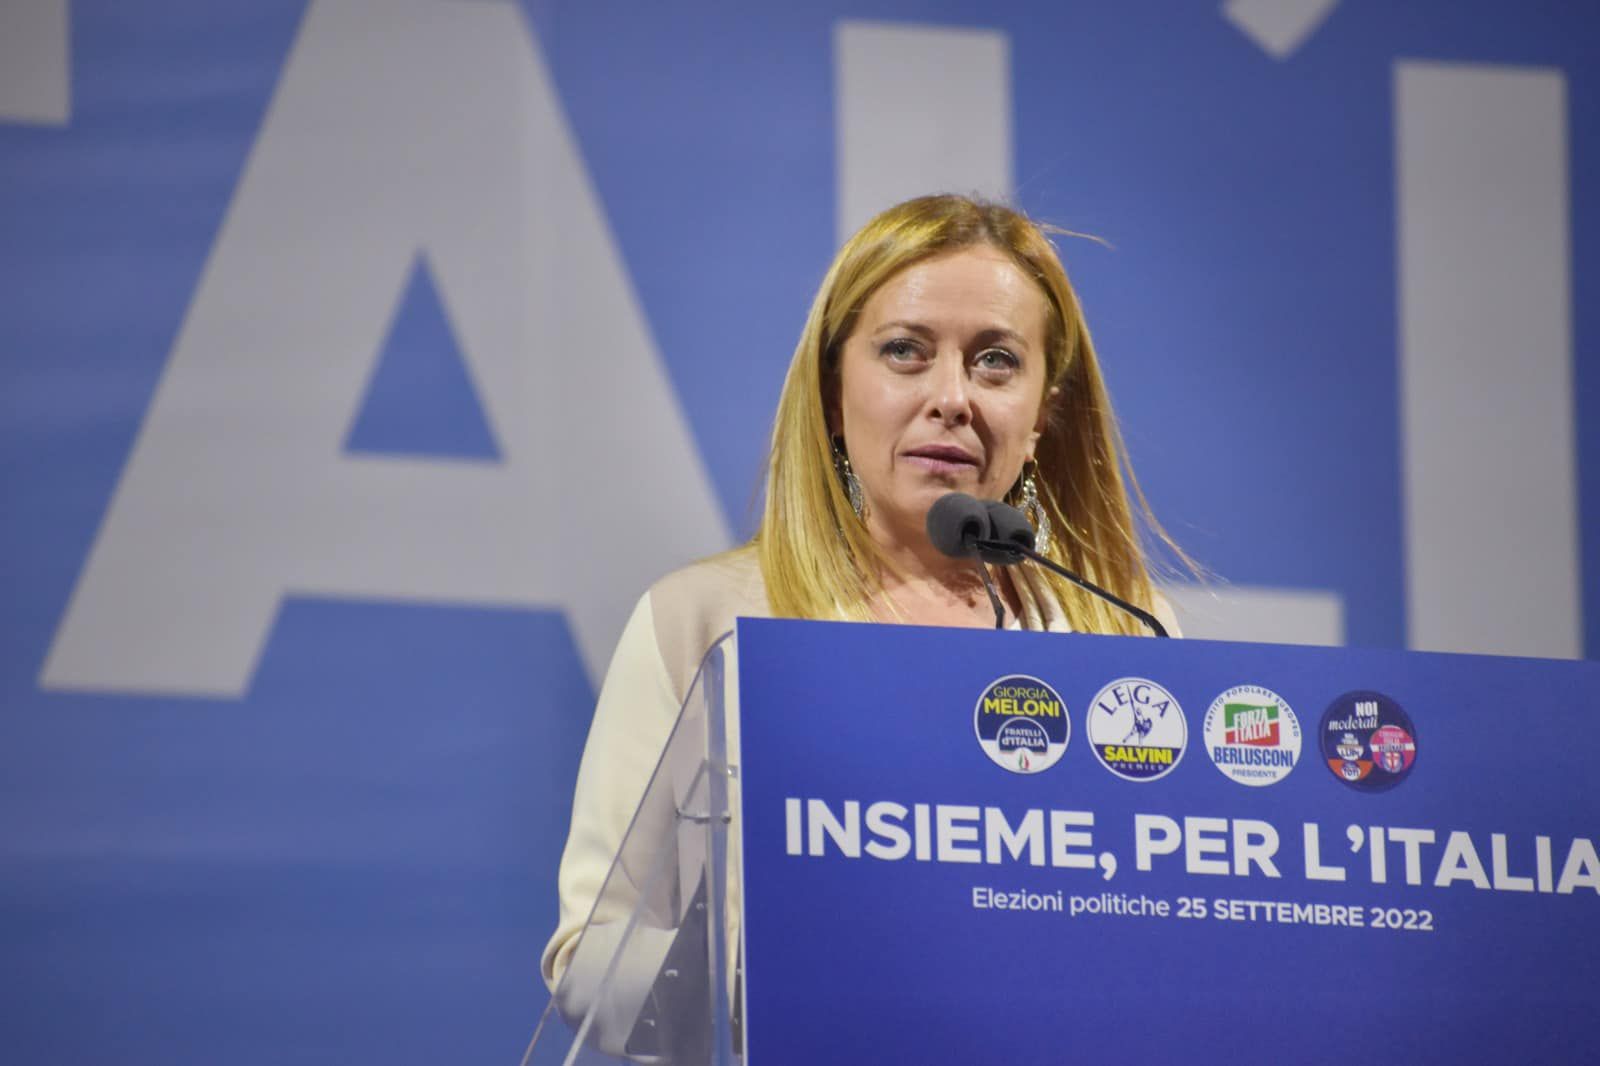 Canada Noted Concerns Over Italian Far-Right Victory, But Was Reassured By Pledges To Maintain Geopolitical Status Quo